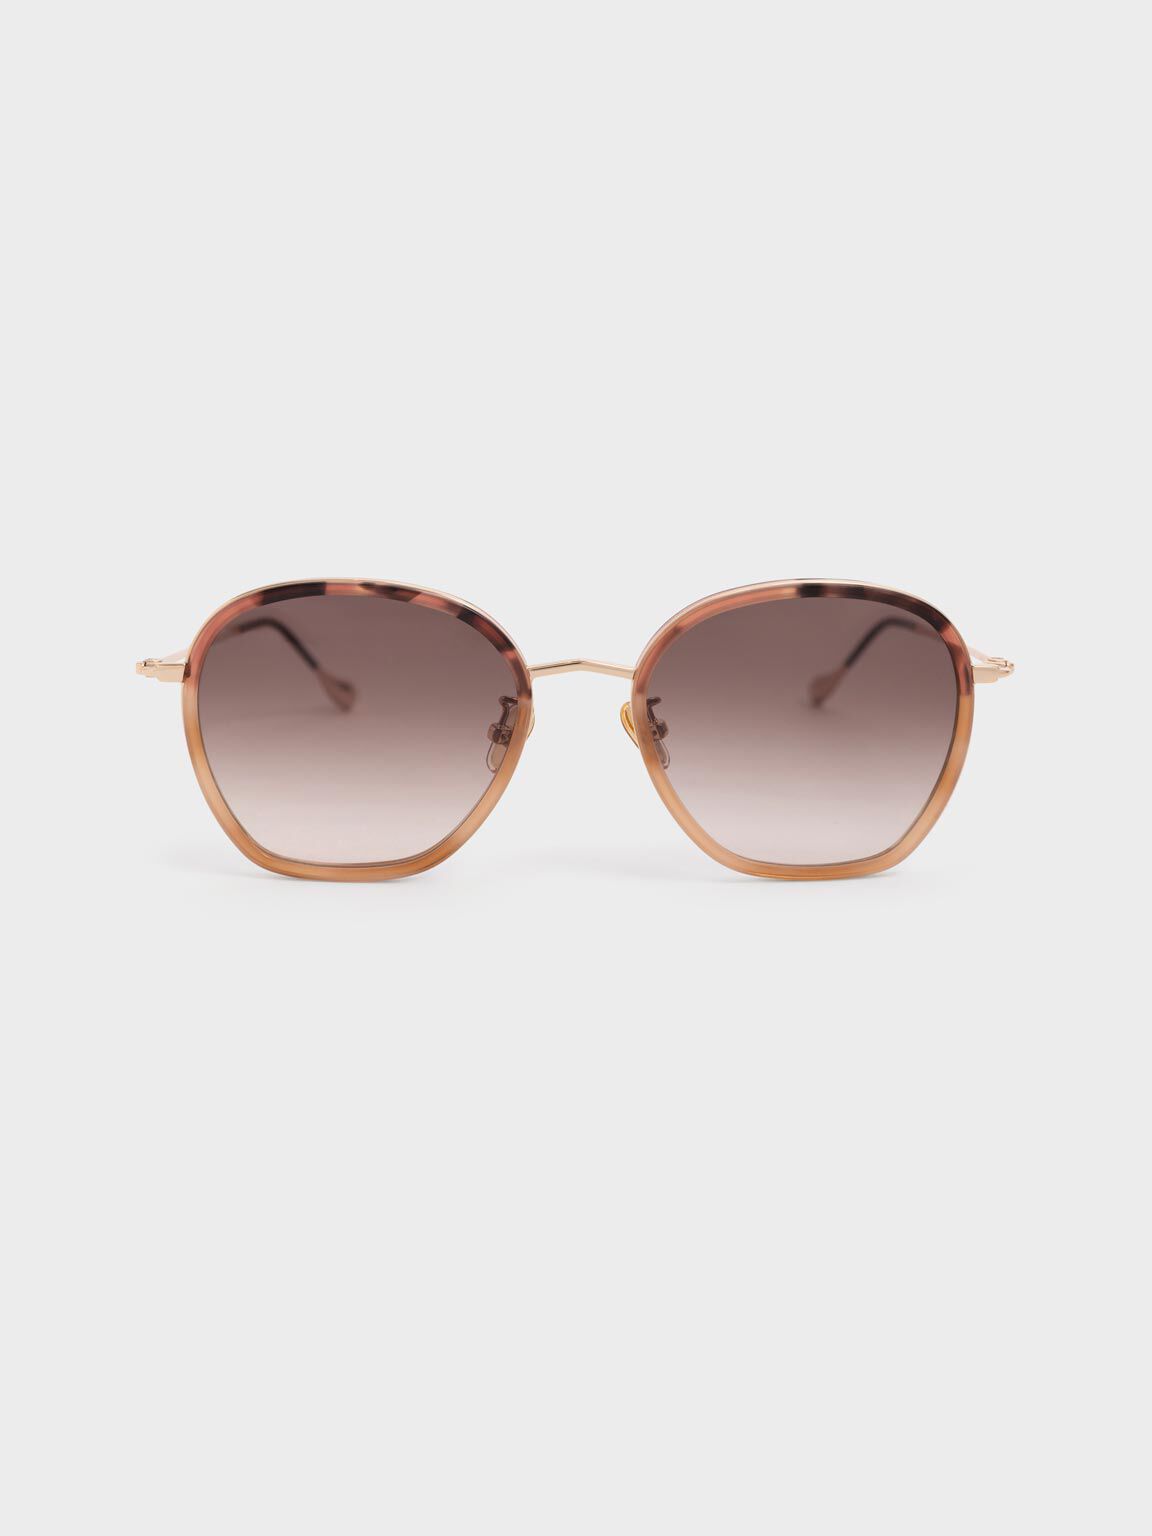 Acetate Pink - Sunglasses LU CHARLES KEITH & Wire-Frame Recycled